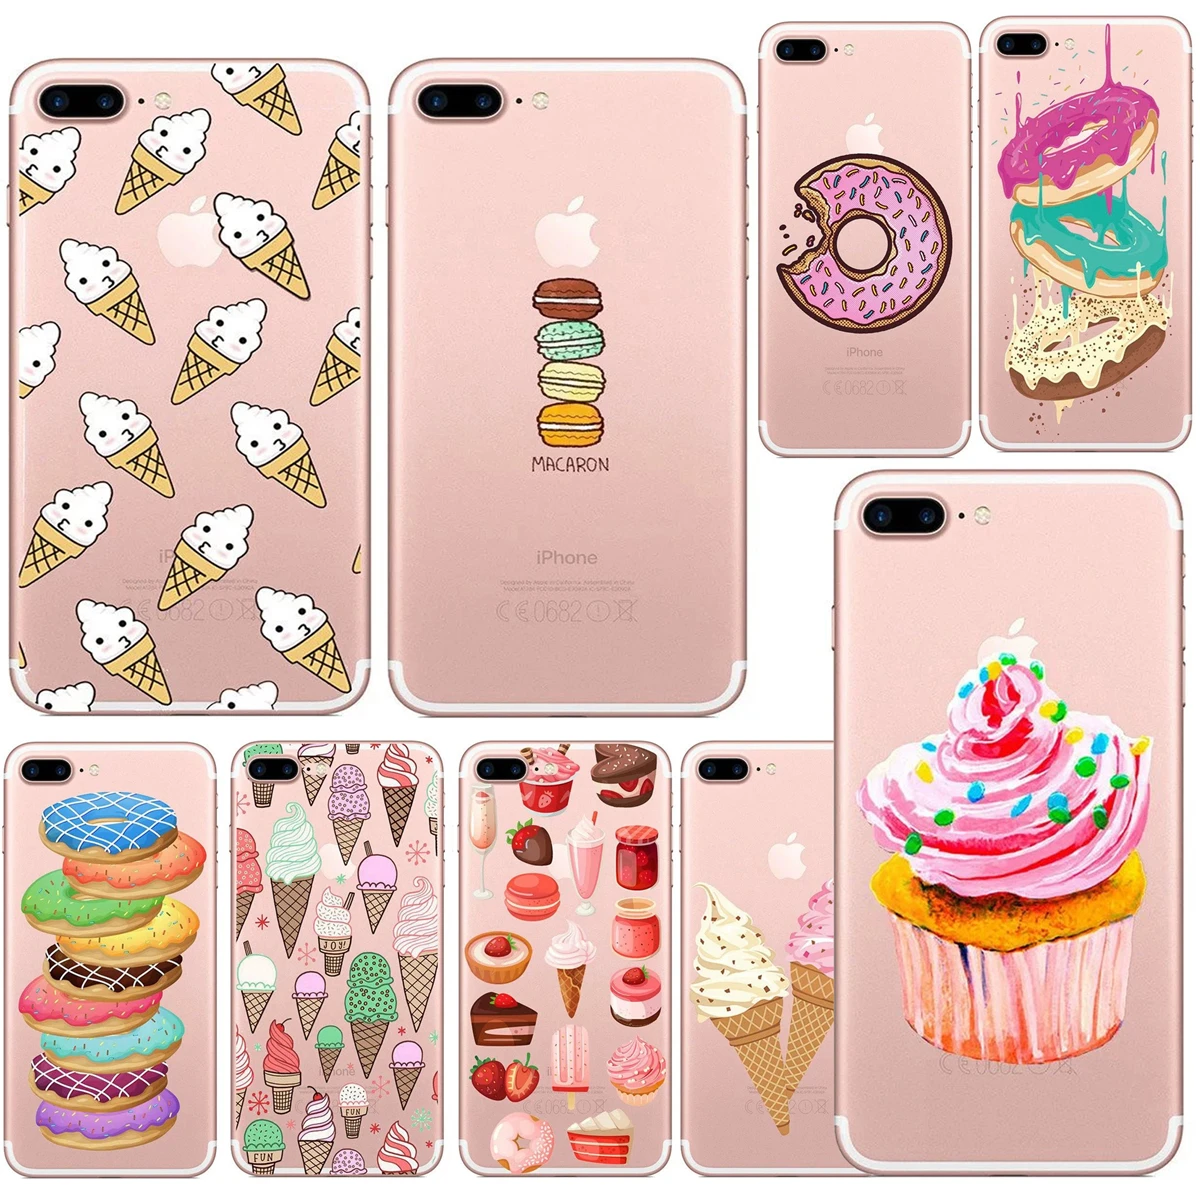 

Lovely Donut Candy Ice Cream Dessert Food Transparent TPU Case Cover For iPhone 4s 6 6s 5 5s SE 7 7Plus Fashion Cell Phone Case